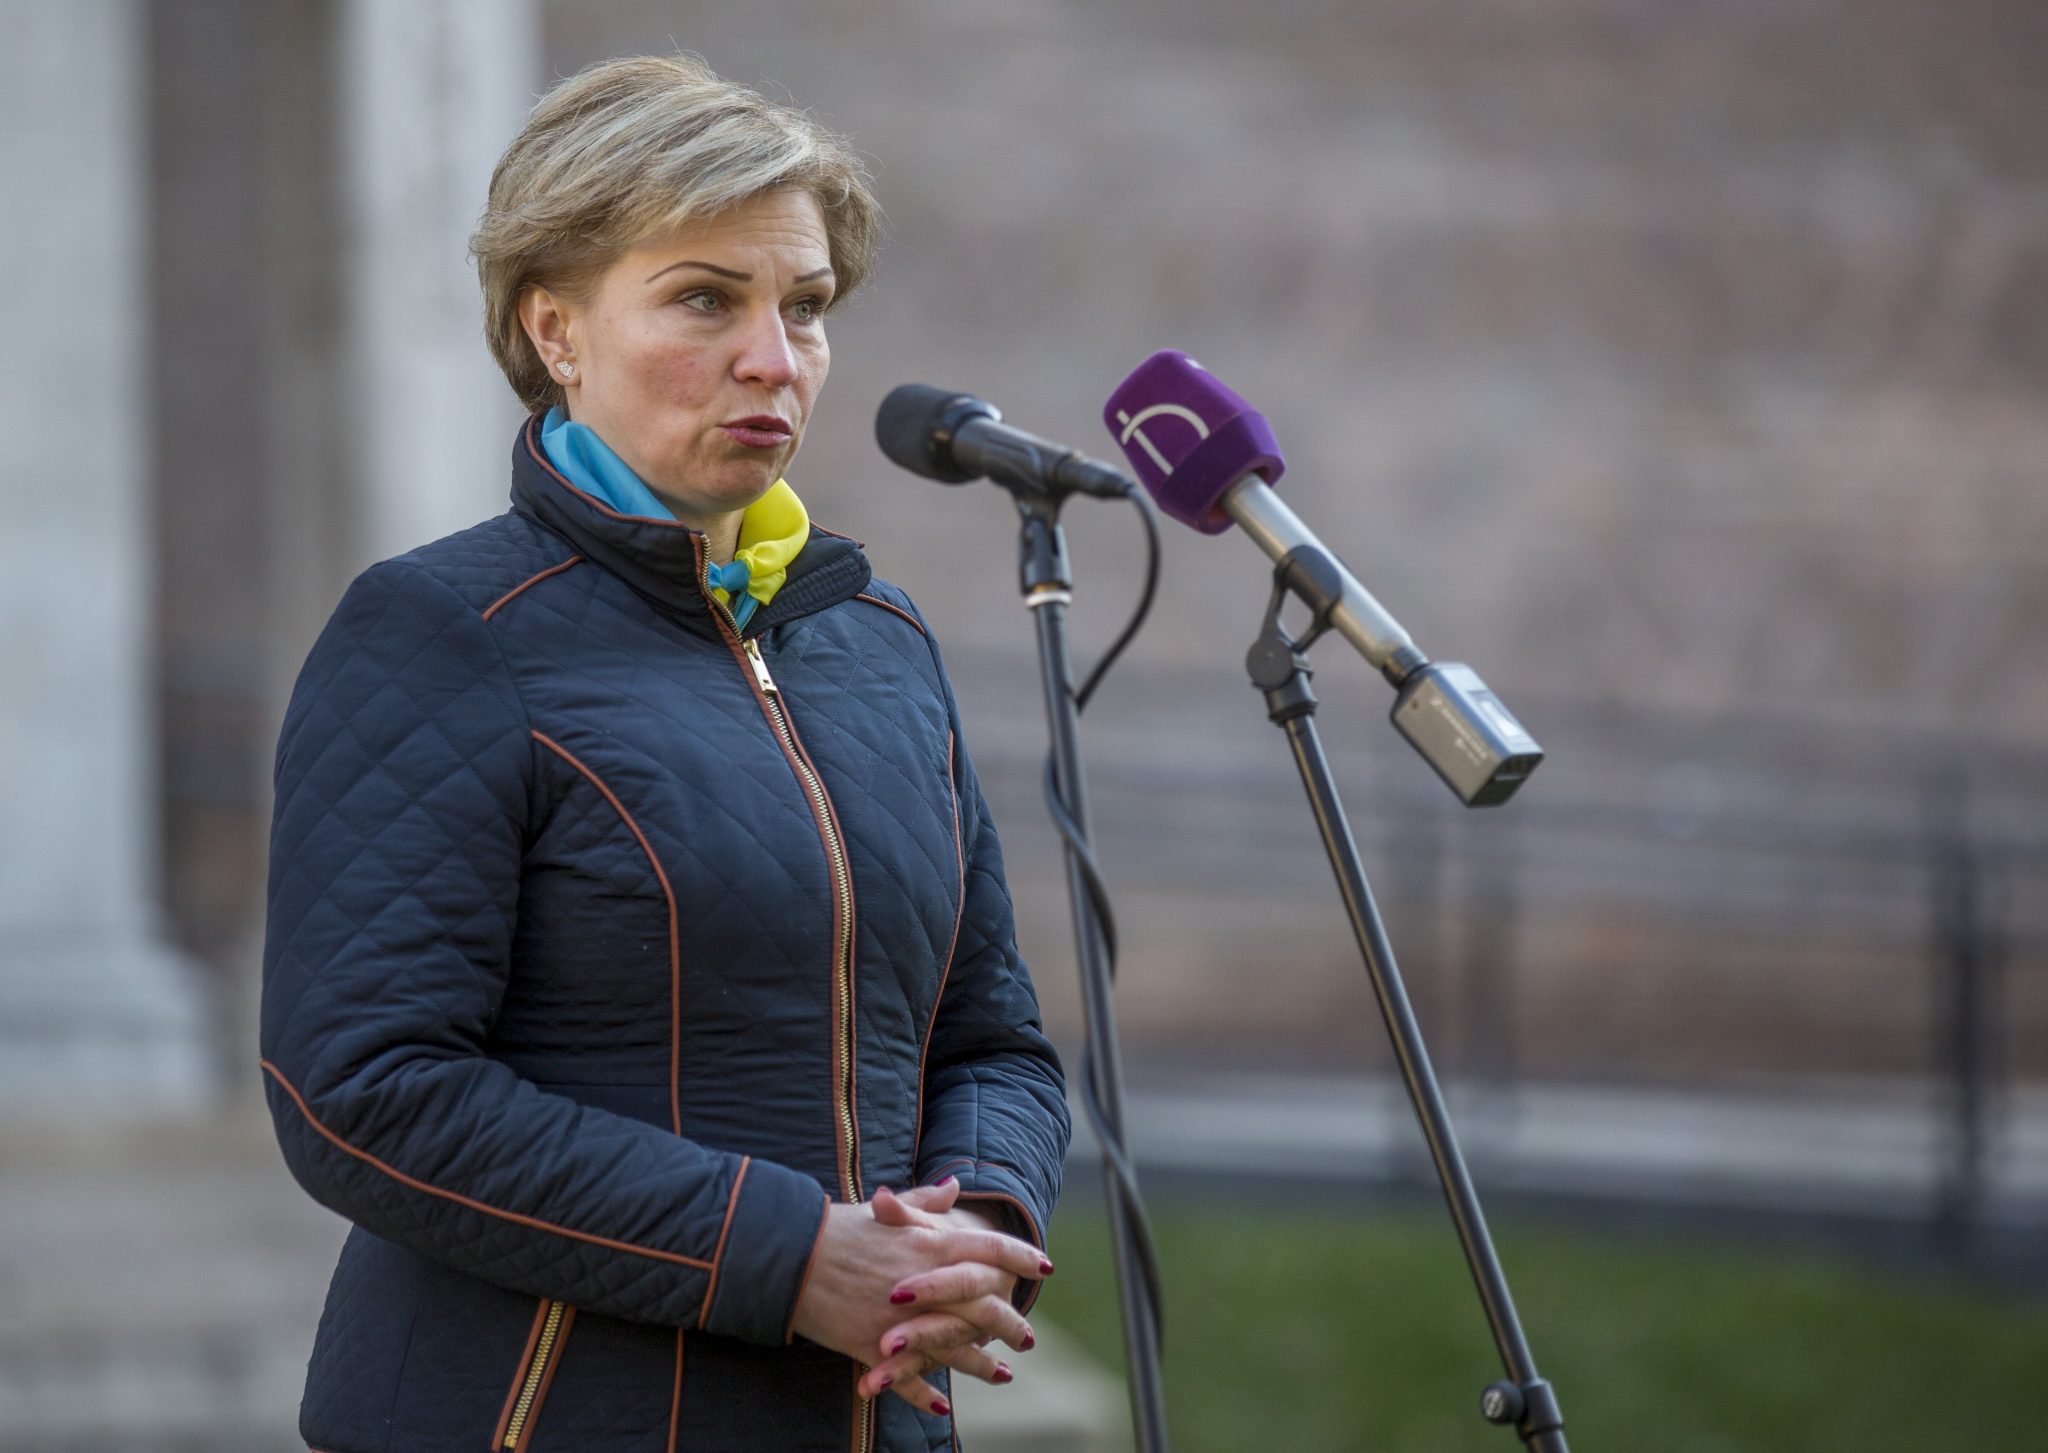 “You Will Be next, Putin Won’t Stop!”, Ukraine’s Ambassador to Hungary Said, as She Lambasted the Orbán Government